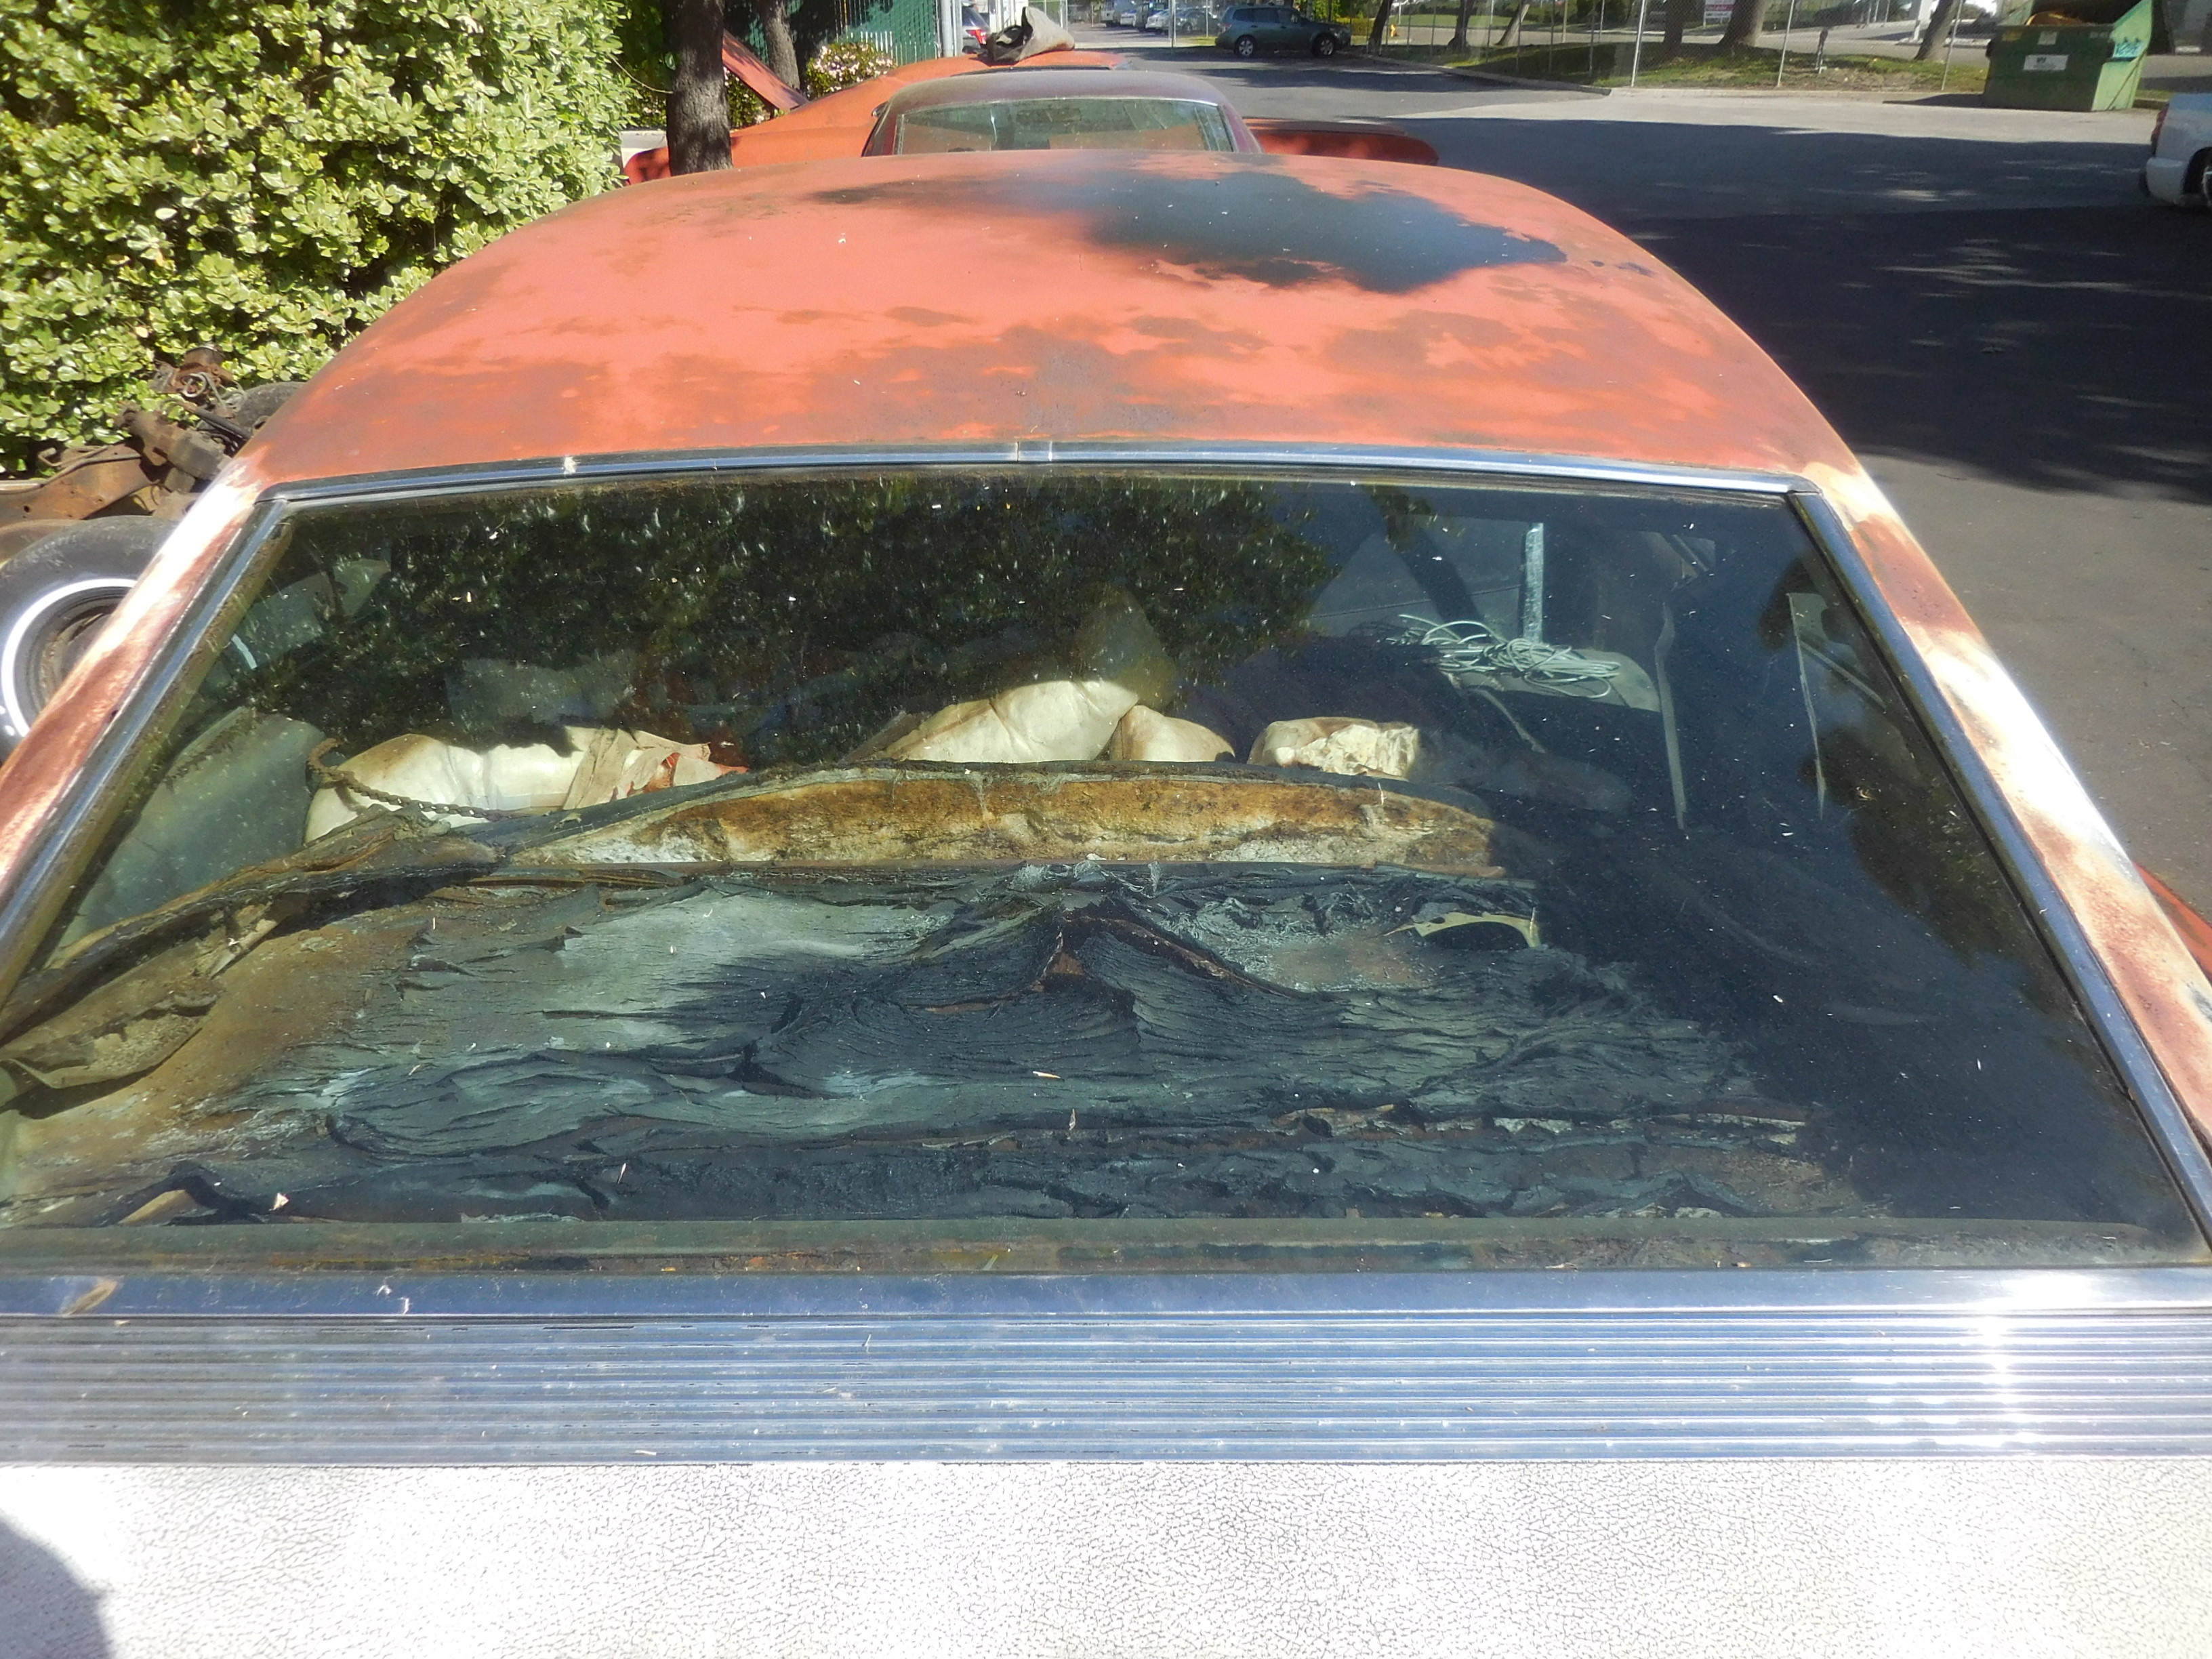 We just got in many body parts from a 1968 Impala 2 door hard top. We have fenders, doors, bumpers, quarter panels, hood, and many misc parts. Call for details 209-462-4300.